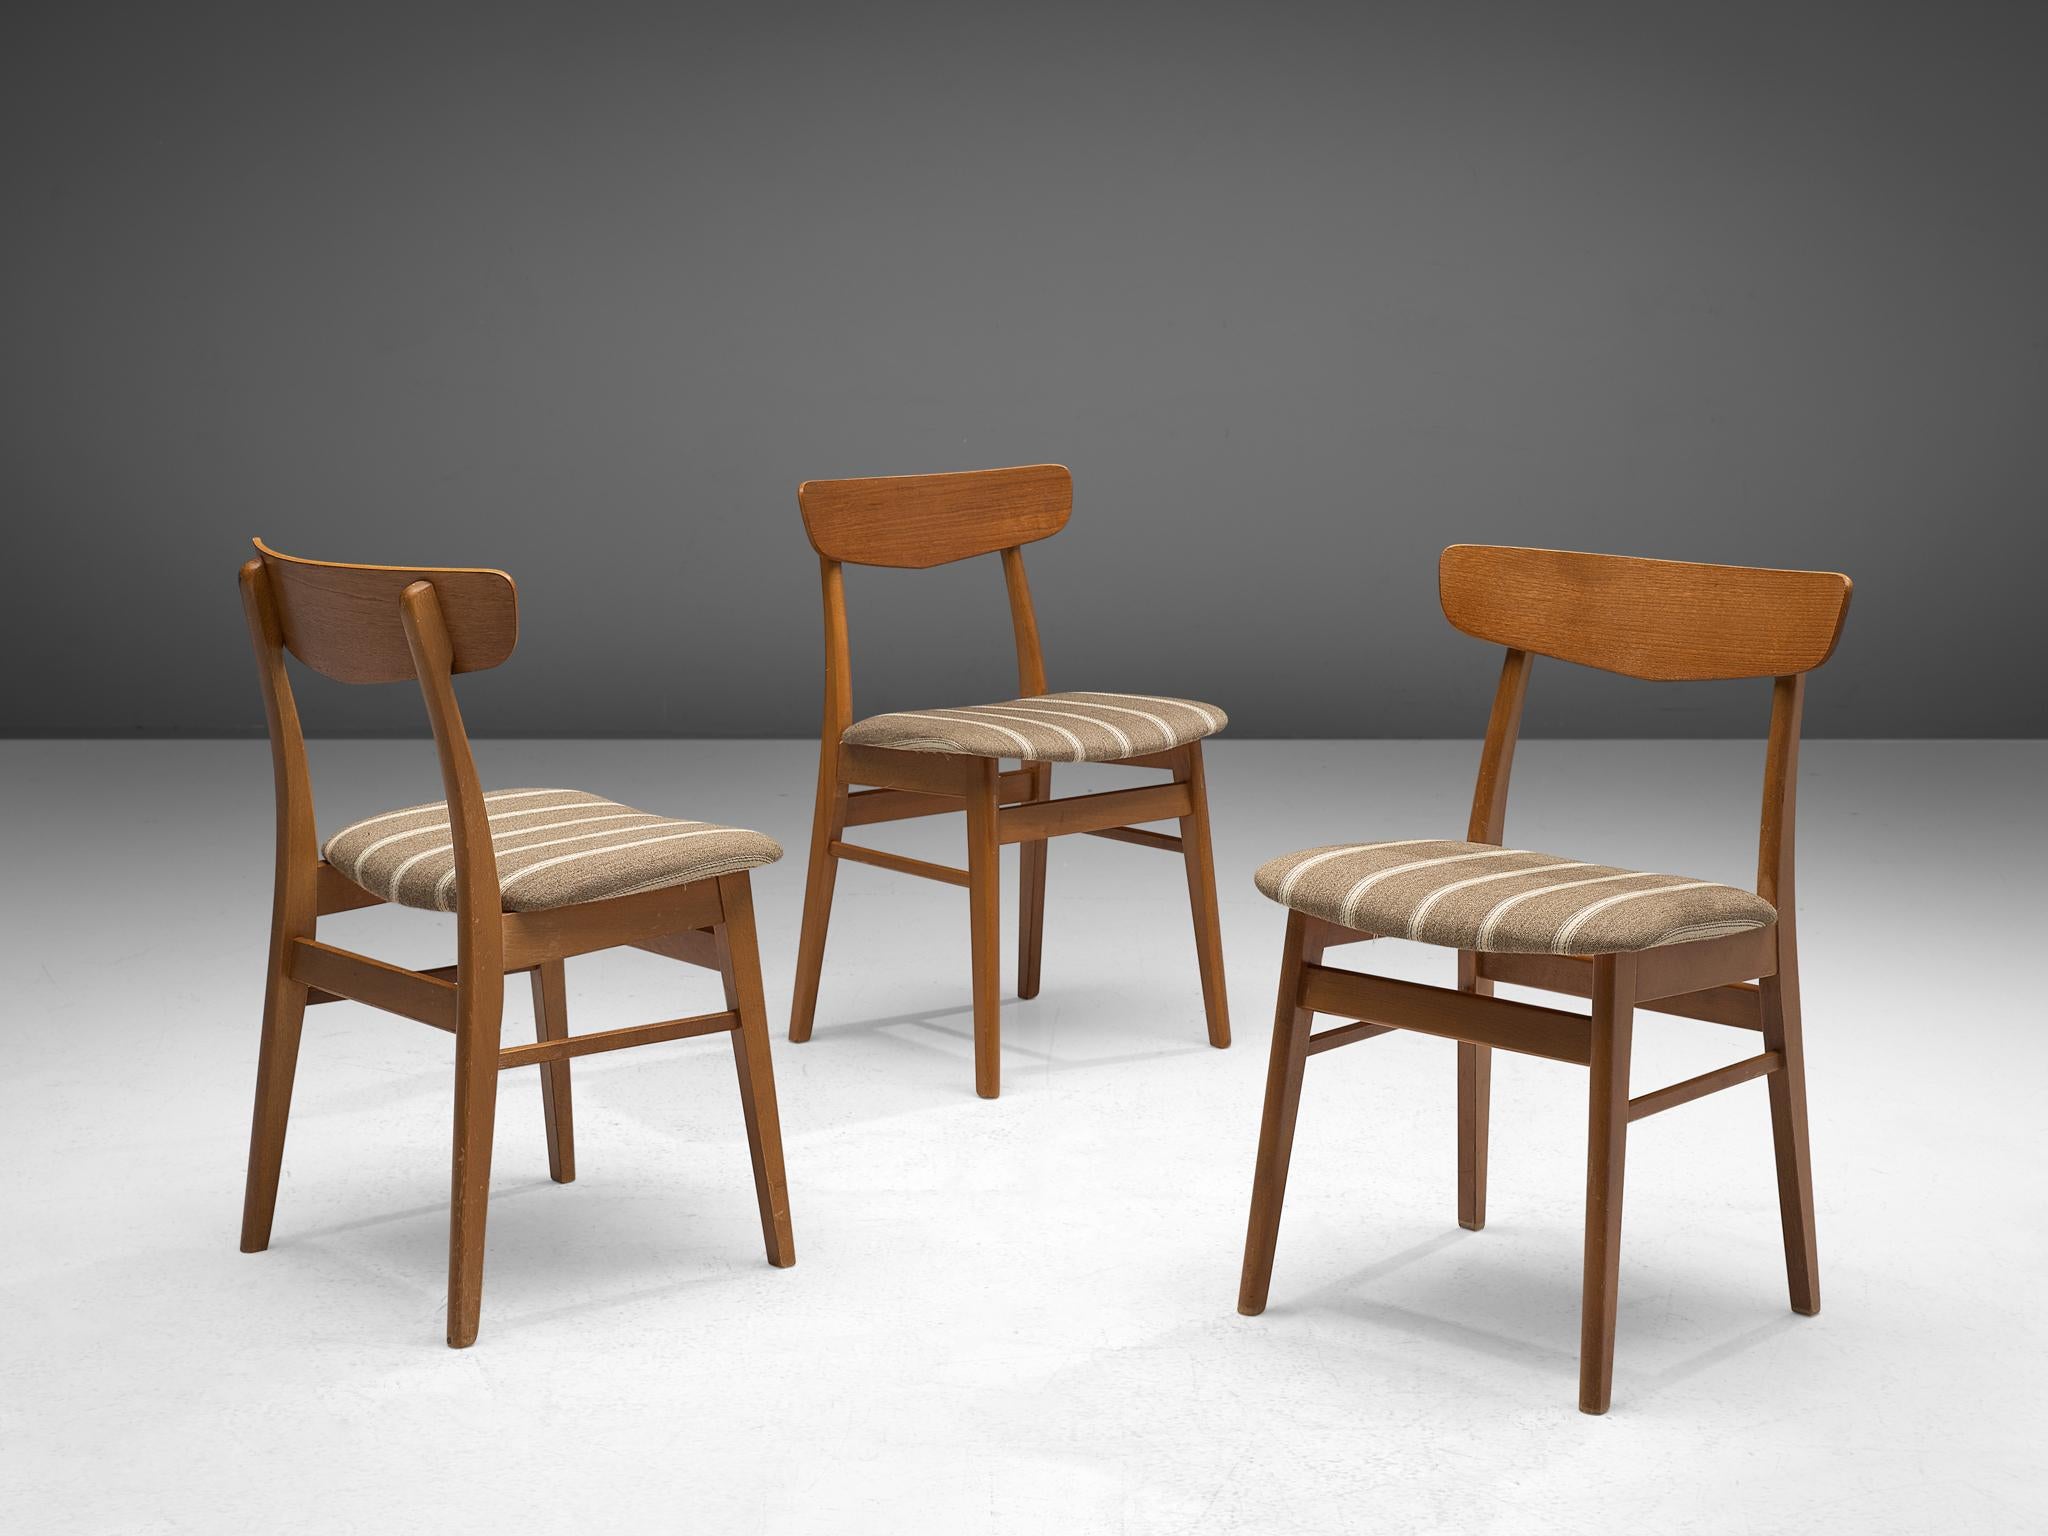 Scandinavian Modern Danish Dining Chairs in Teak and Beige Striped Upholstery